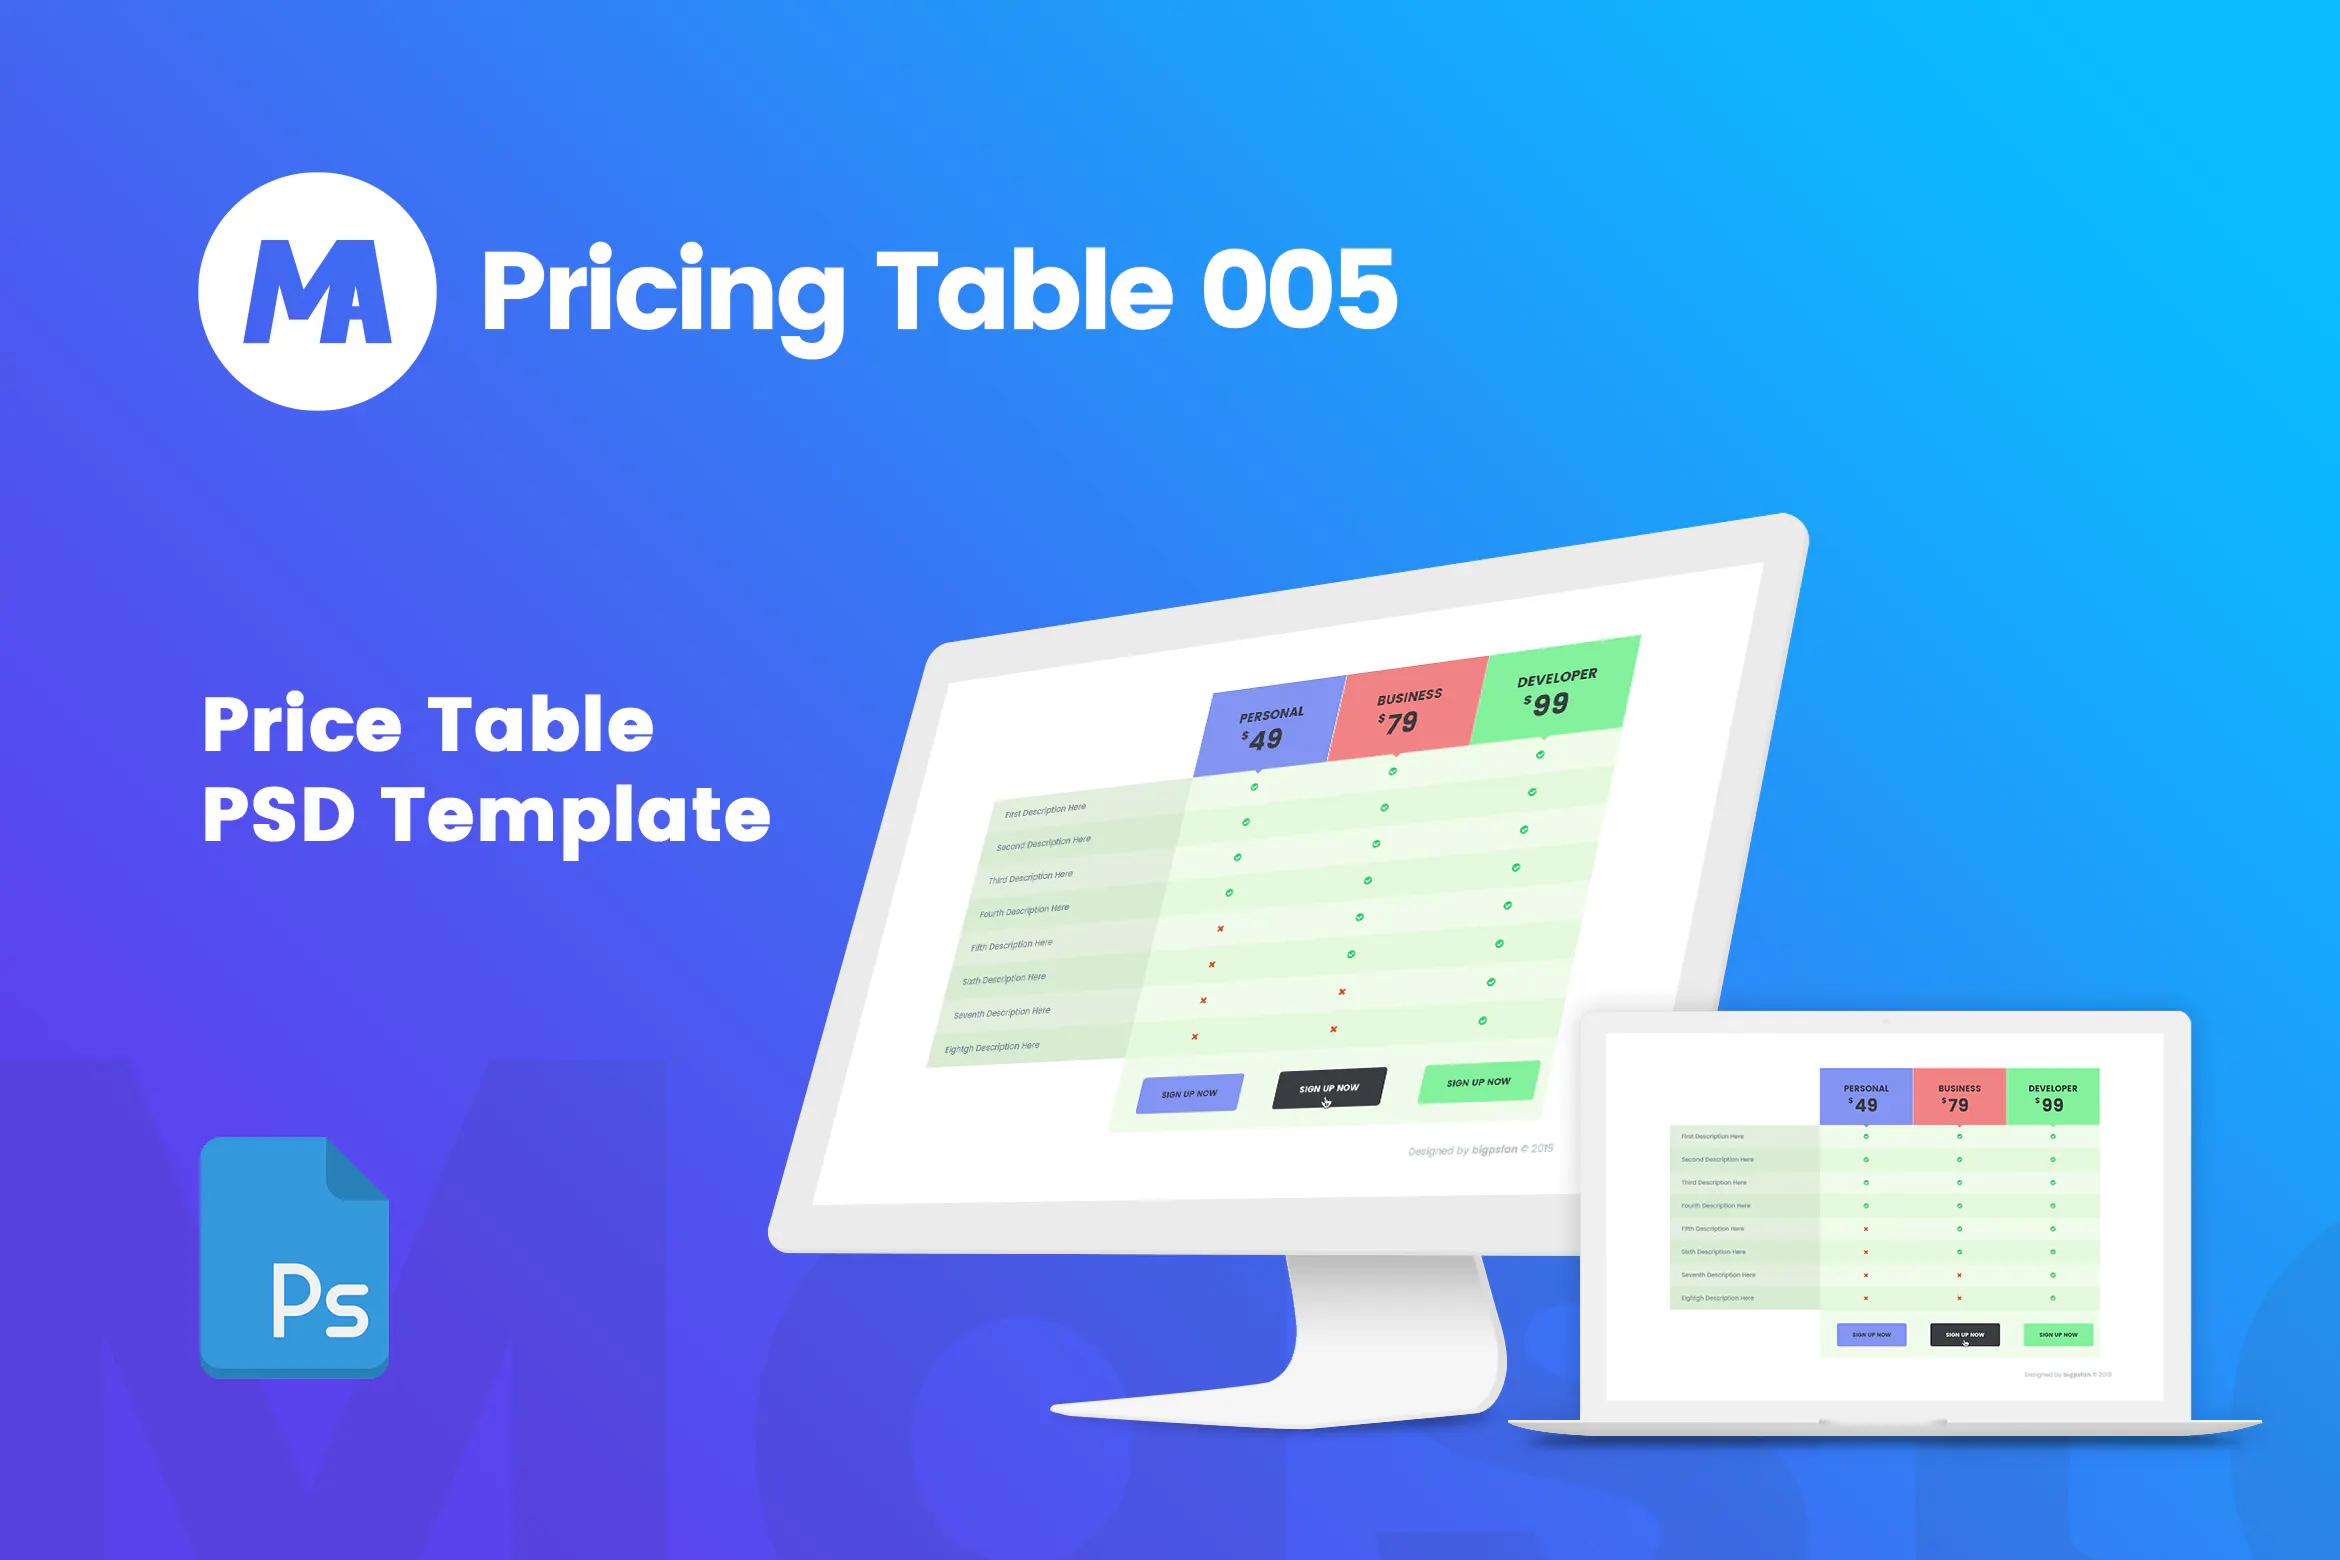 MA – Pricing Table 005